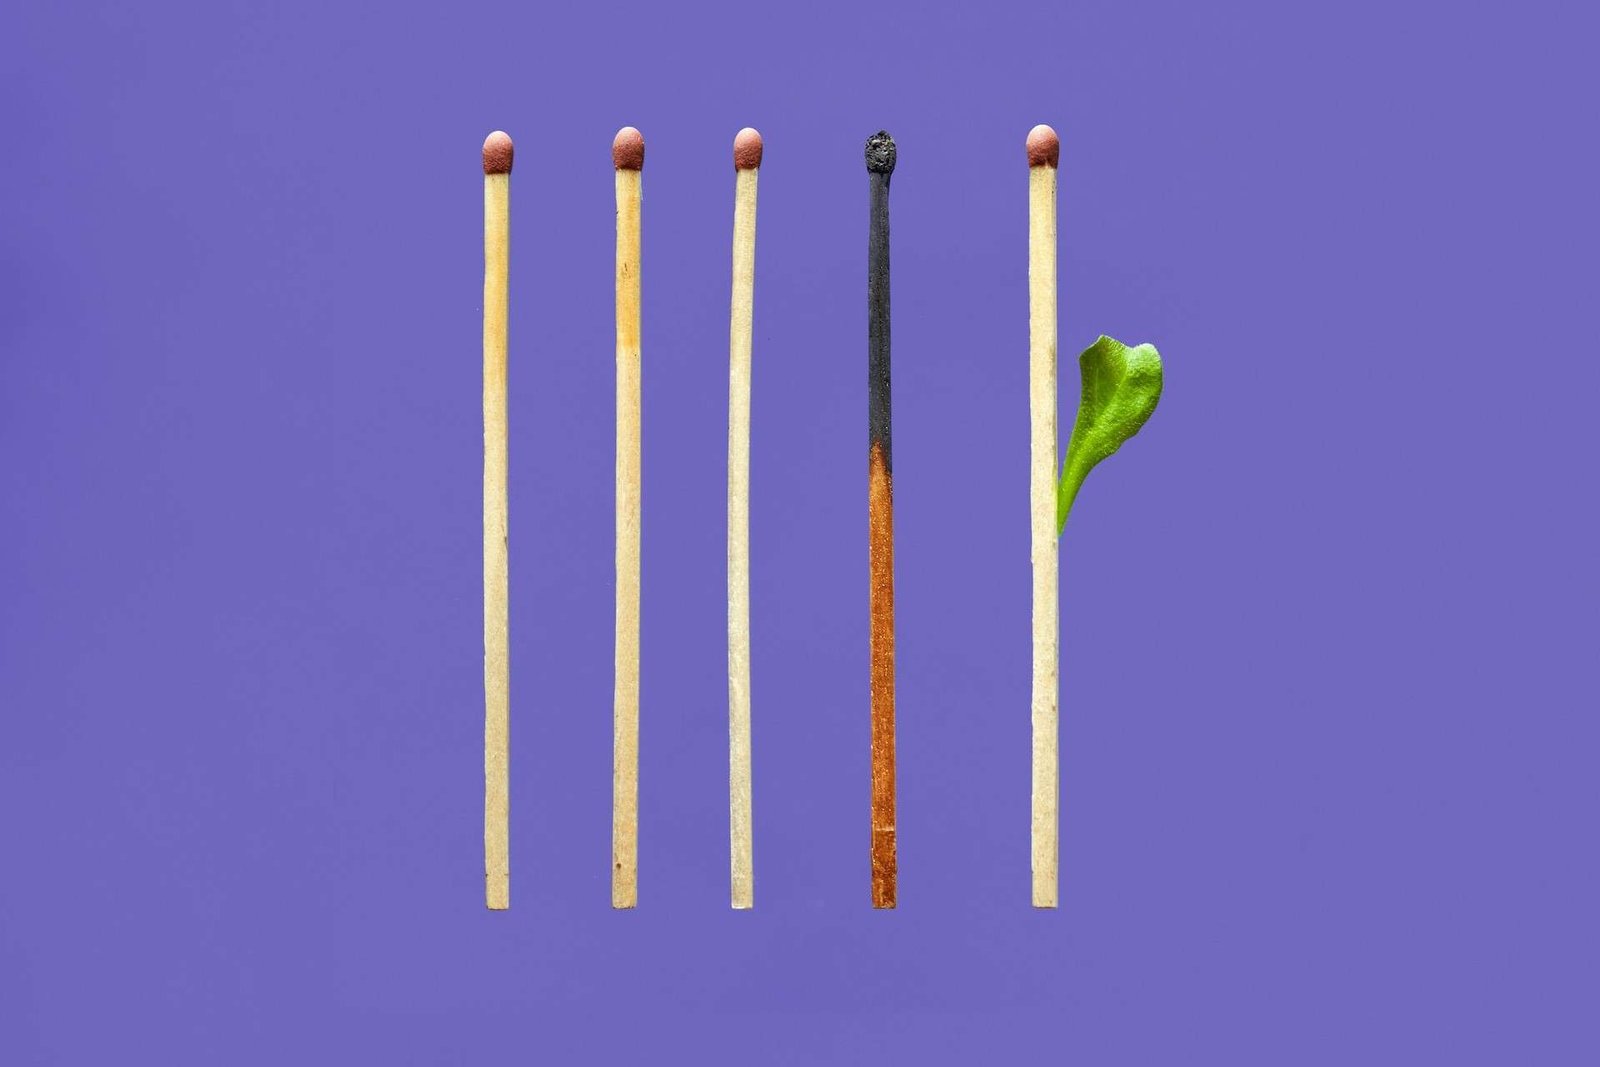 Five redhead matches on a purple background. One match is burnt out, but the final match has a green shoot growing out of it.